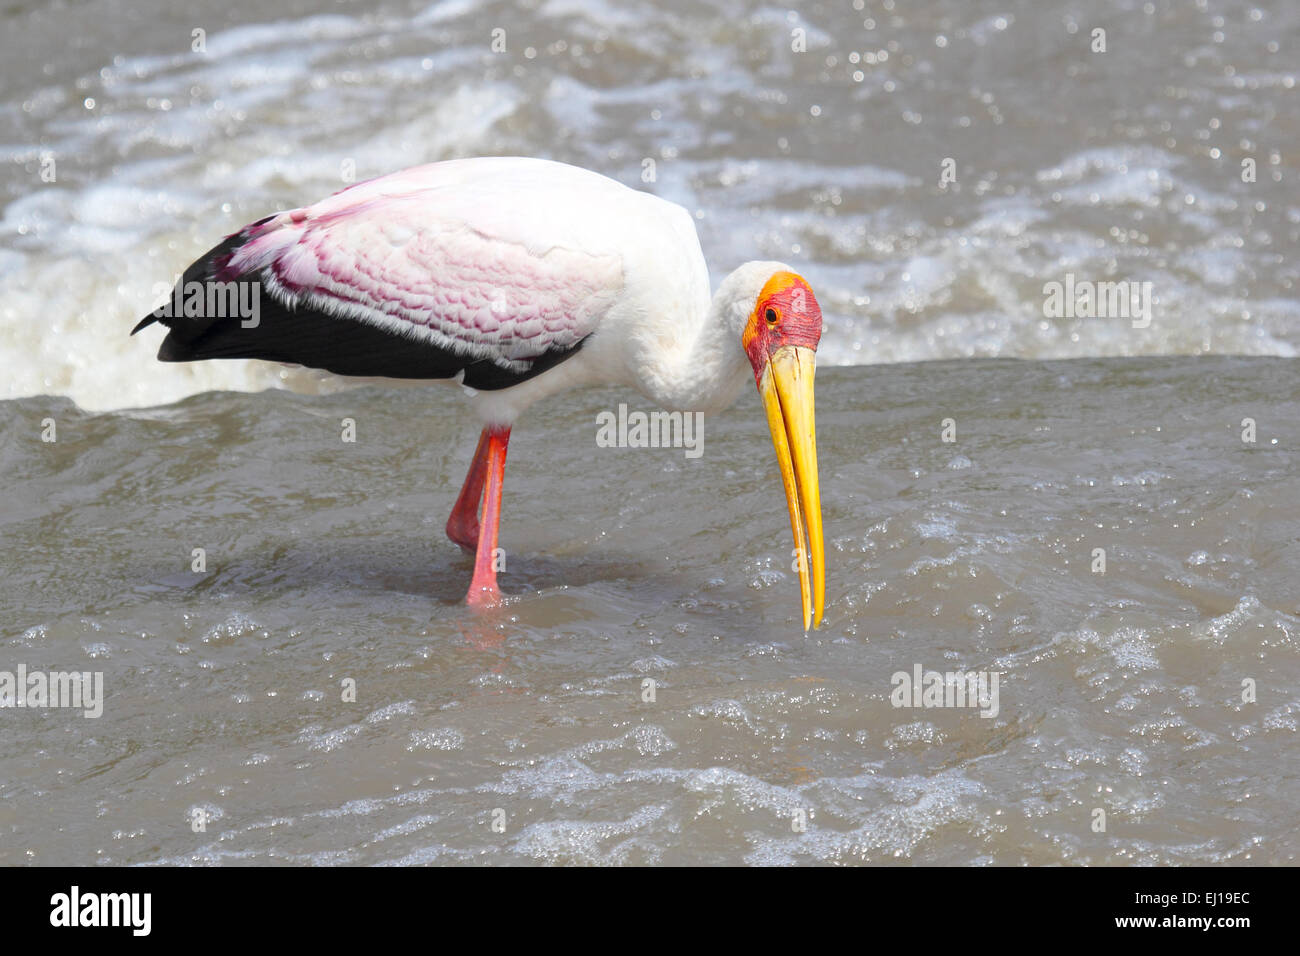 A Yellow-billed Stork, Mycteria ibis, fishing in a african river in Tanzania. This large wading bird is widespread in regions so Stock Photo